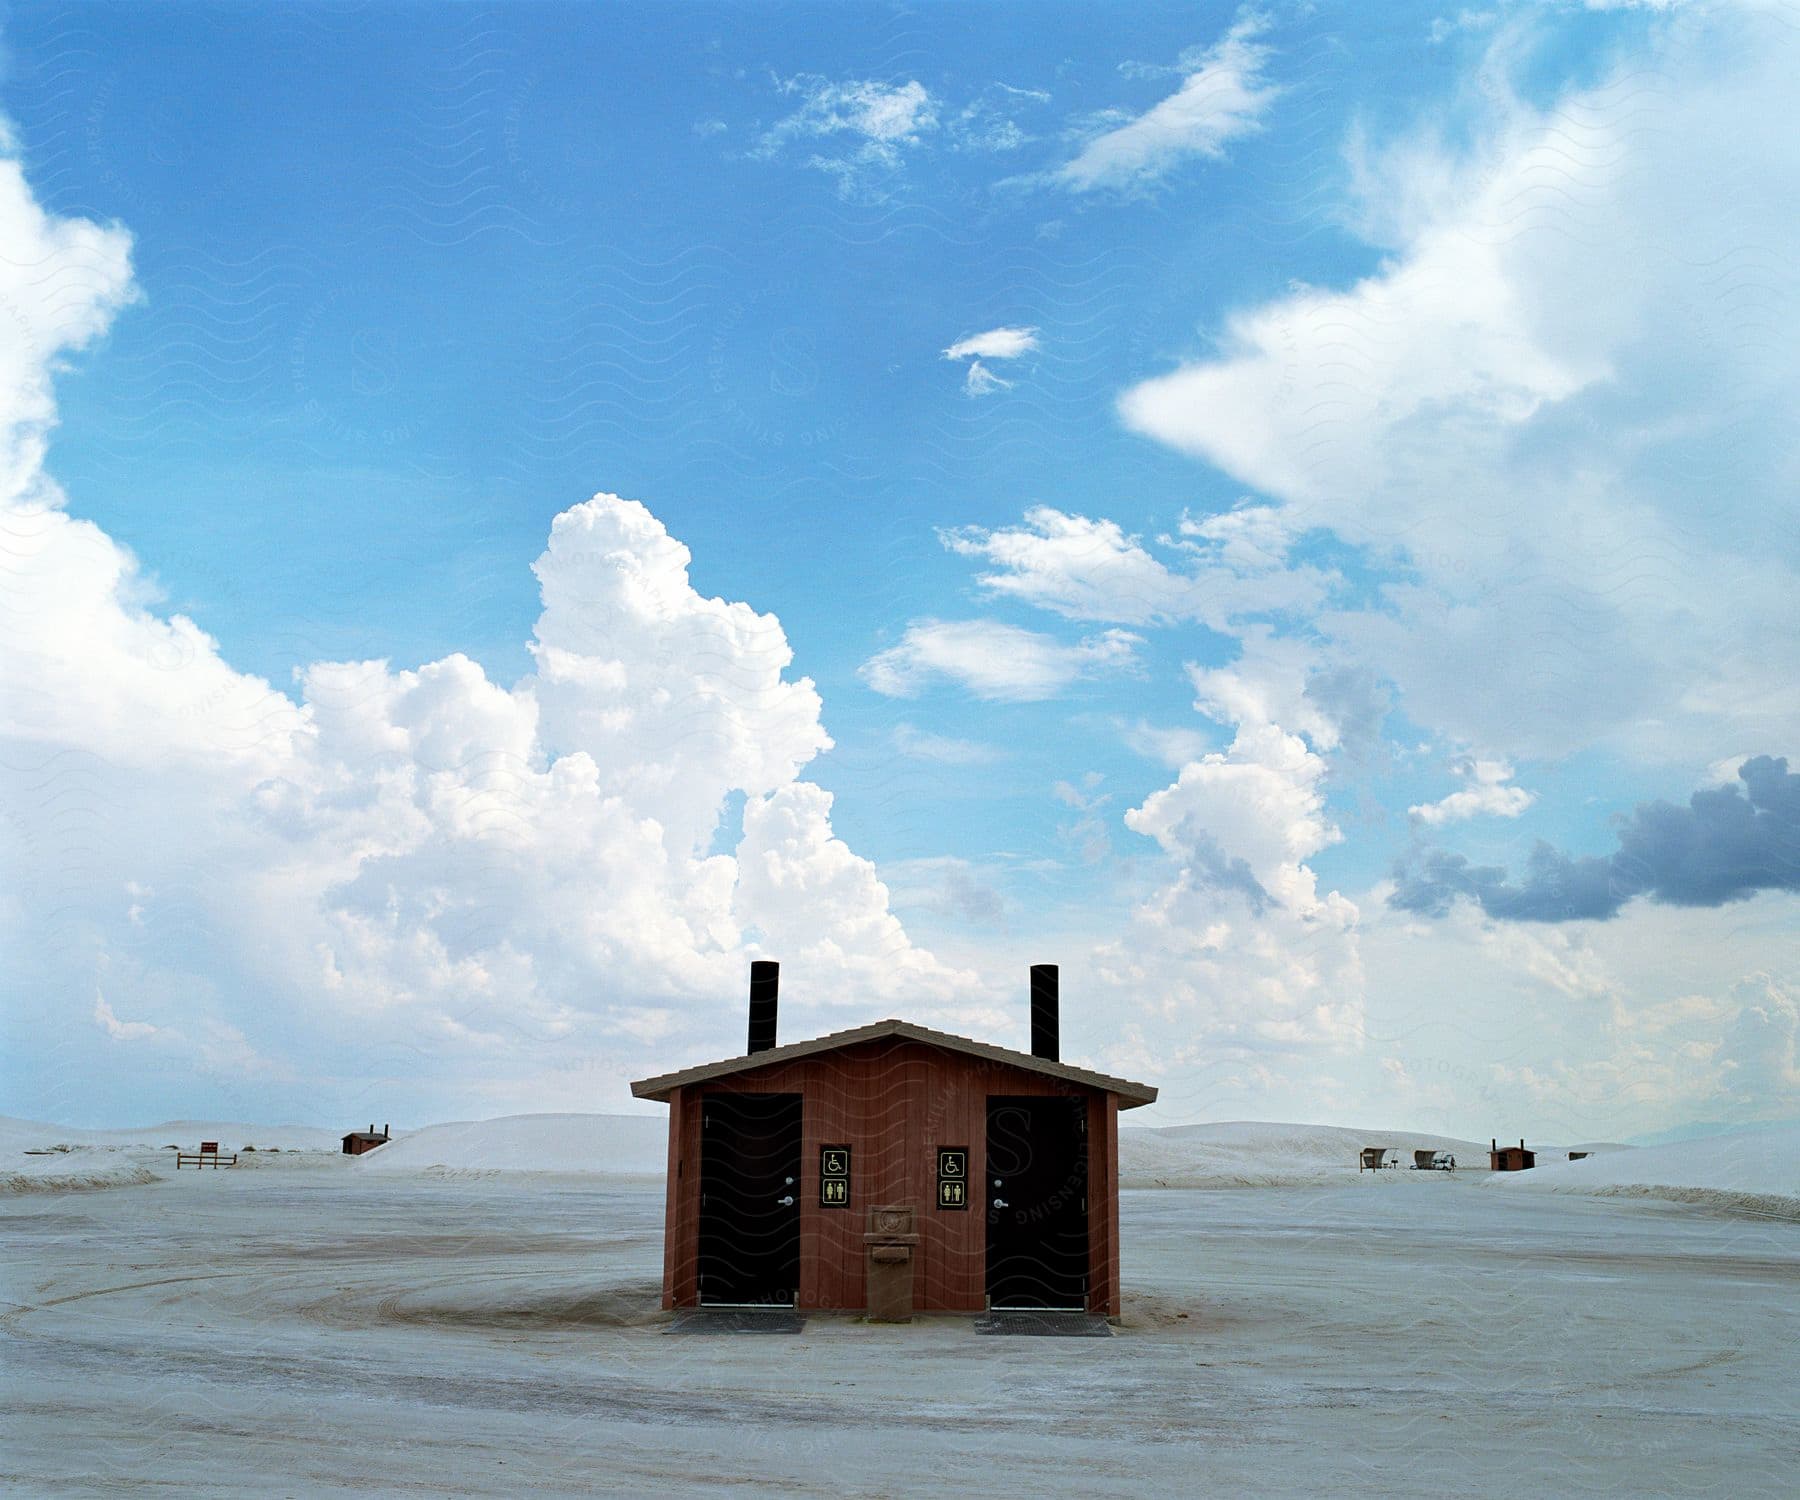 A wooden shed bathroom in a white sands desert under a light blue sky with fluffy clouds